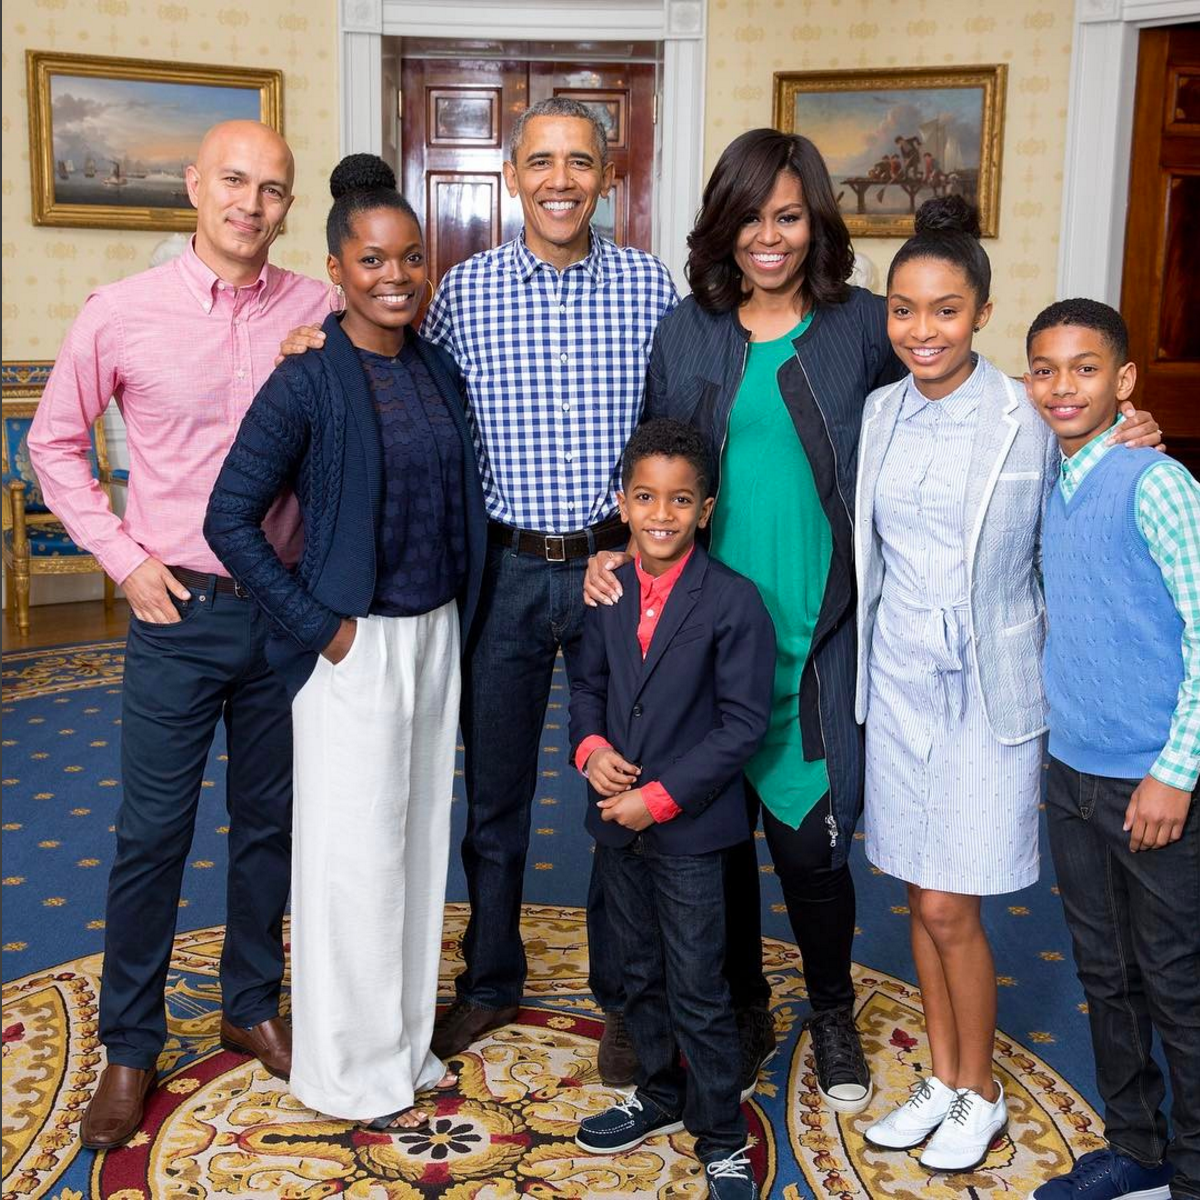 The Week In Celebrity Instagrams: Stars Share Their Favorite Photos With The Obamas